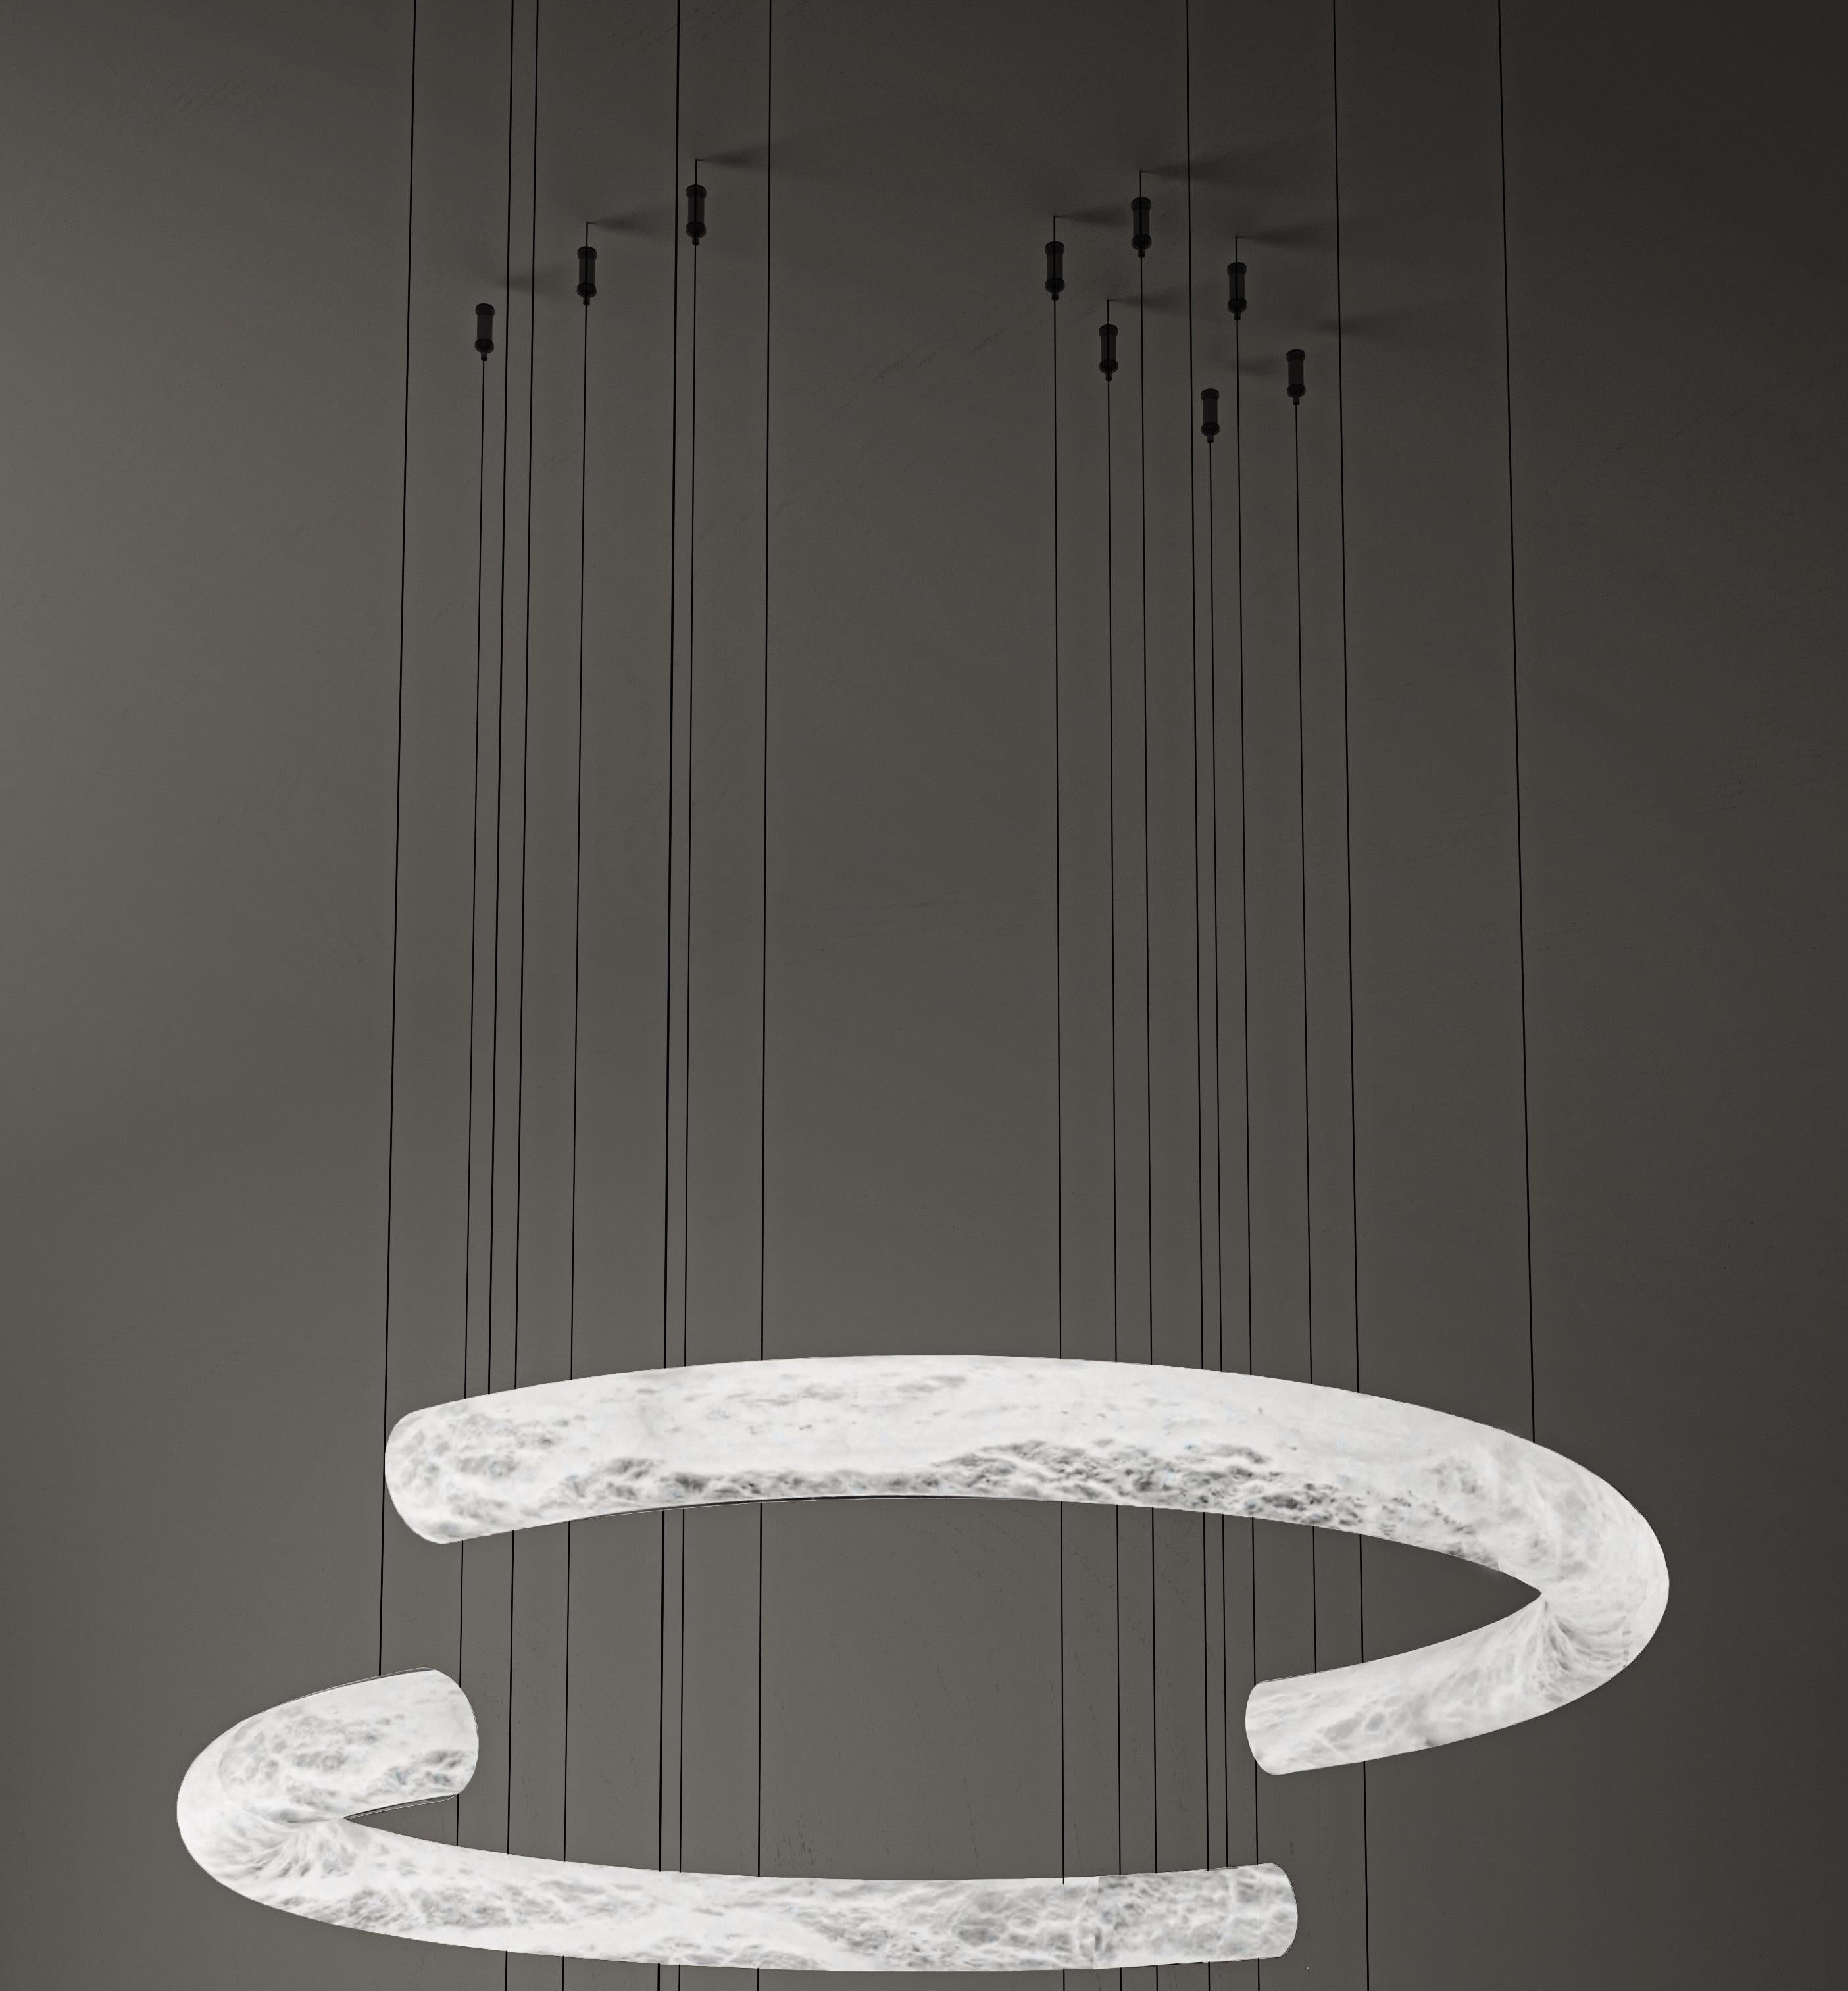 Futatsu Large Suspension Lamp by Alabastro Italiano
Dimensions: Ø 105 x H 200 cm.
Materials: White alabaster and metal.

Available in different finishes: Shiny Silver, Bronze, Brushed Brass, Ruggine of Florence, Brushed Burnished, Shiny Gold,